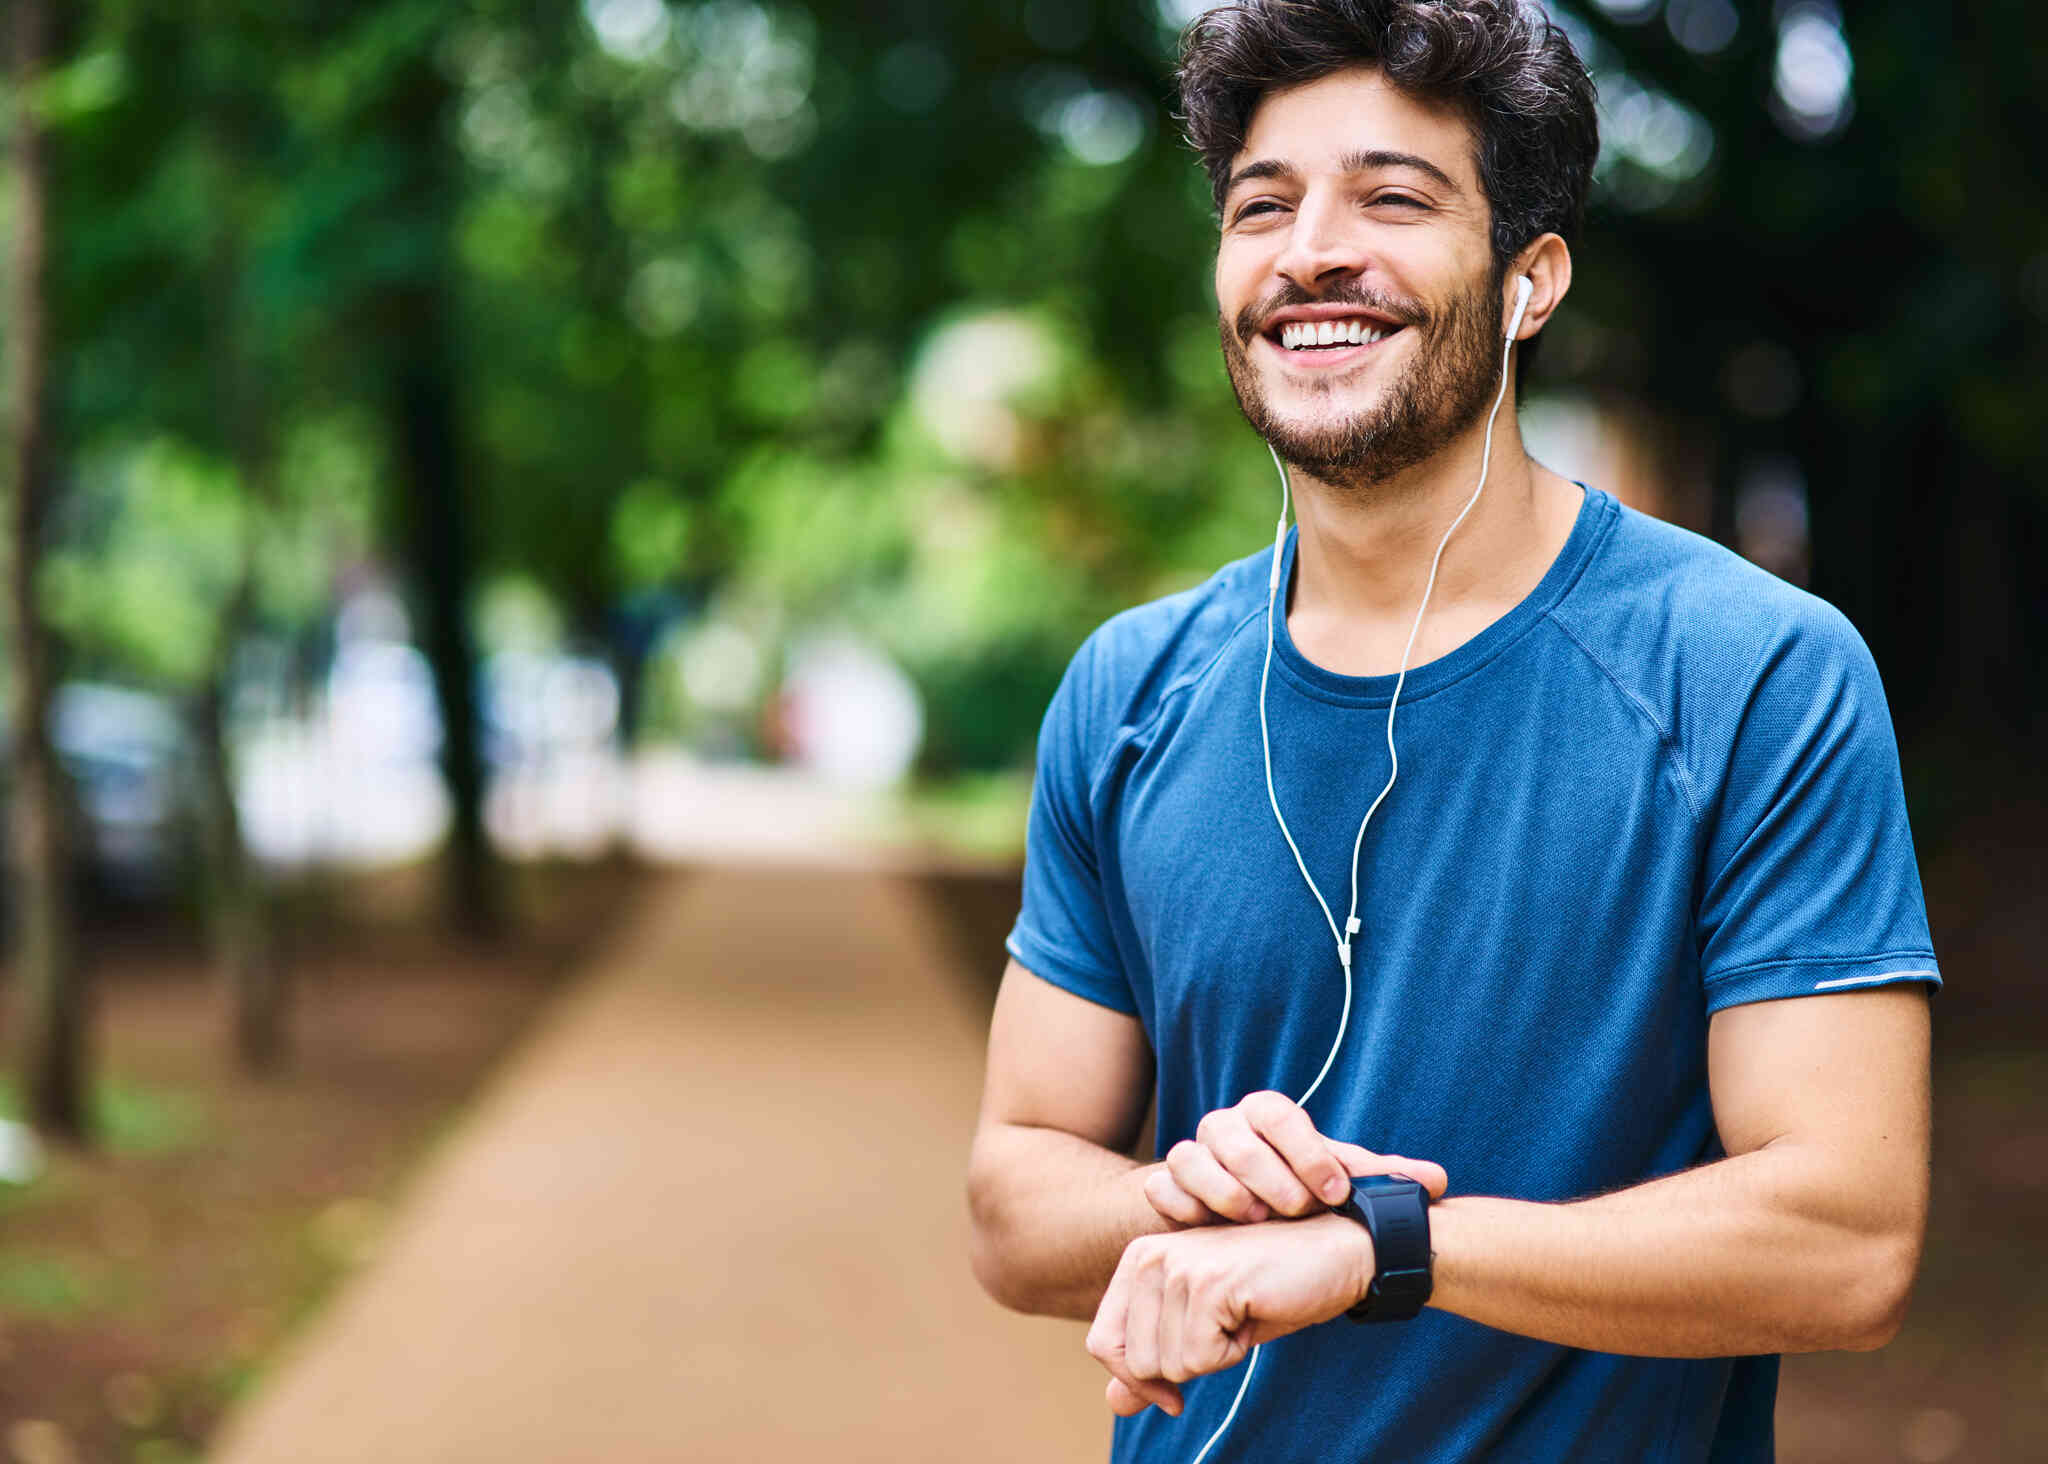 A man in a blue shirt with headphones stands outside on a sunny day and smiles brightly while tapping on his smart watch.